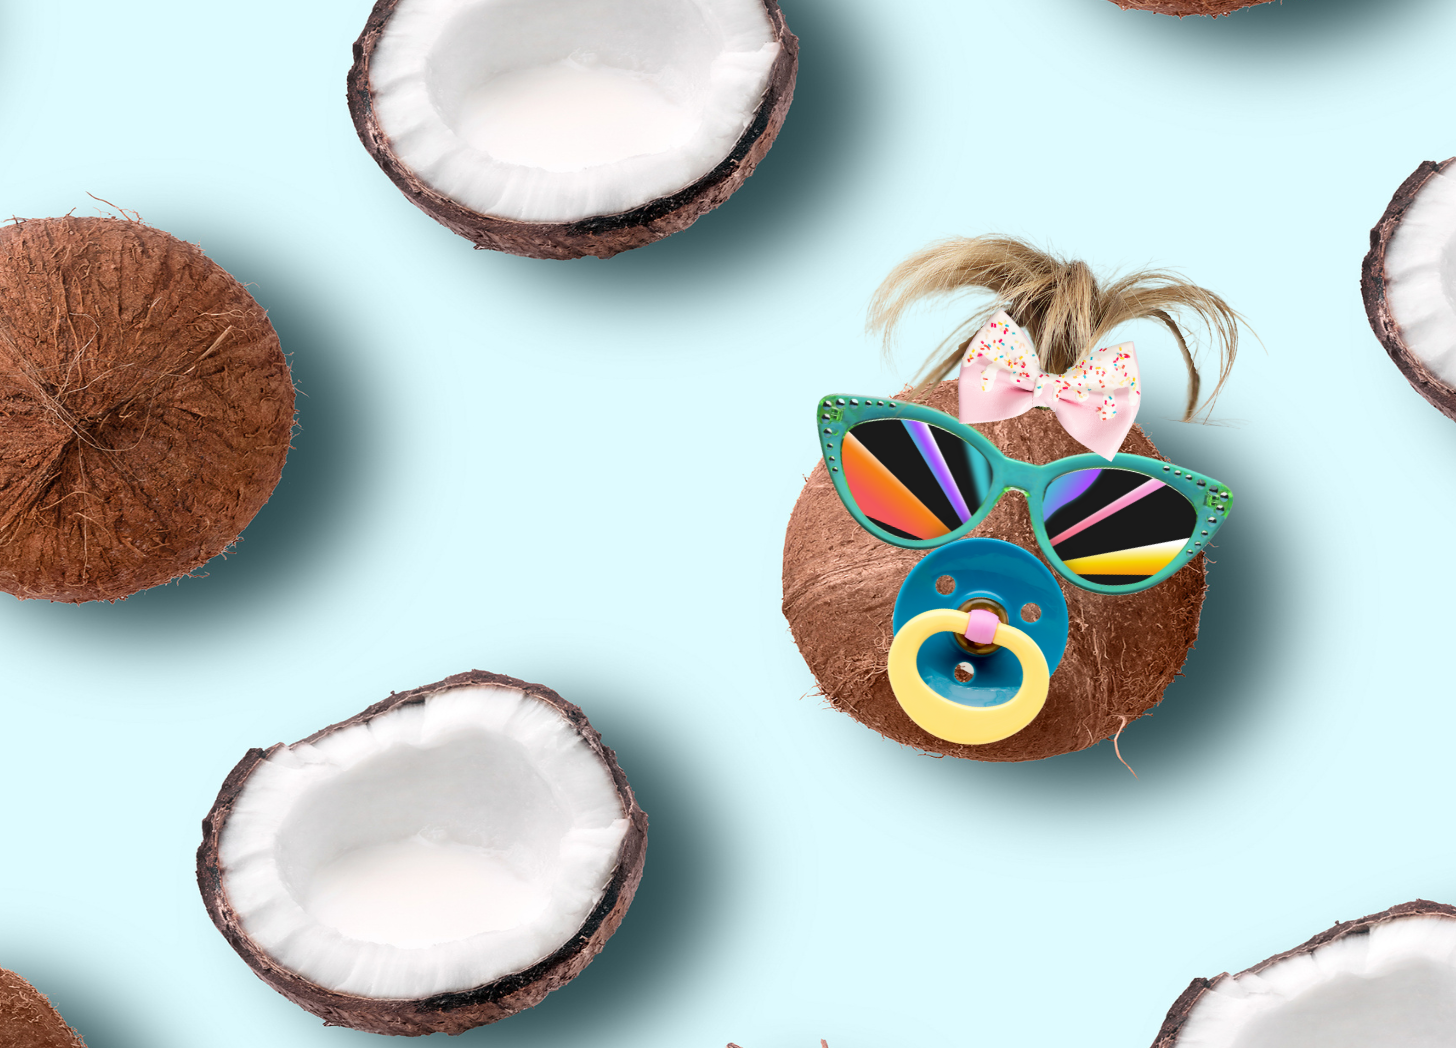 coconuts against blue background, coconuts with hair, coconut in sunglasses and a pacifier